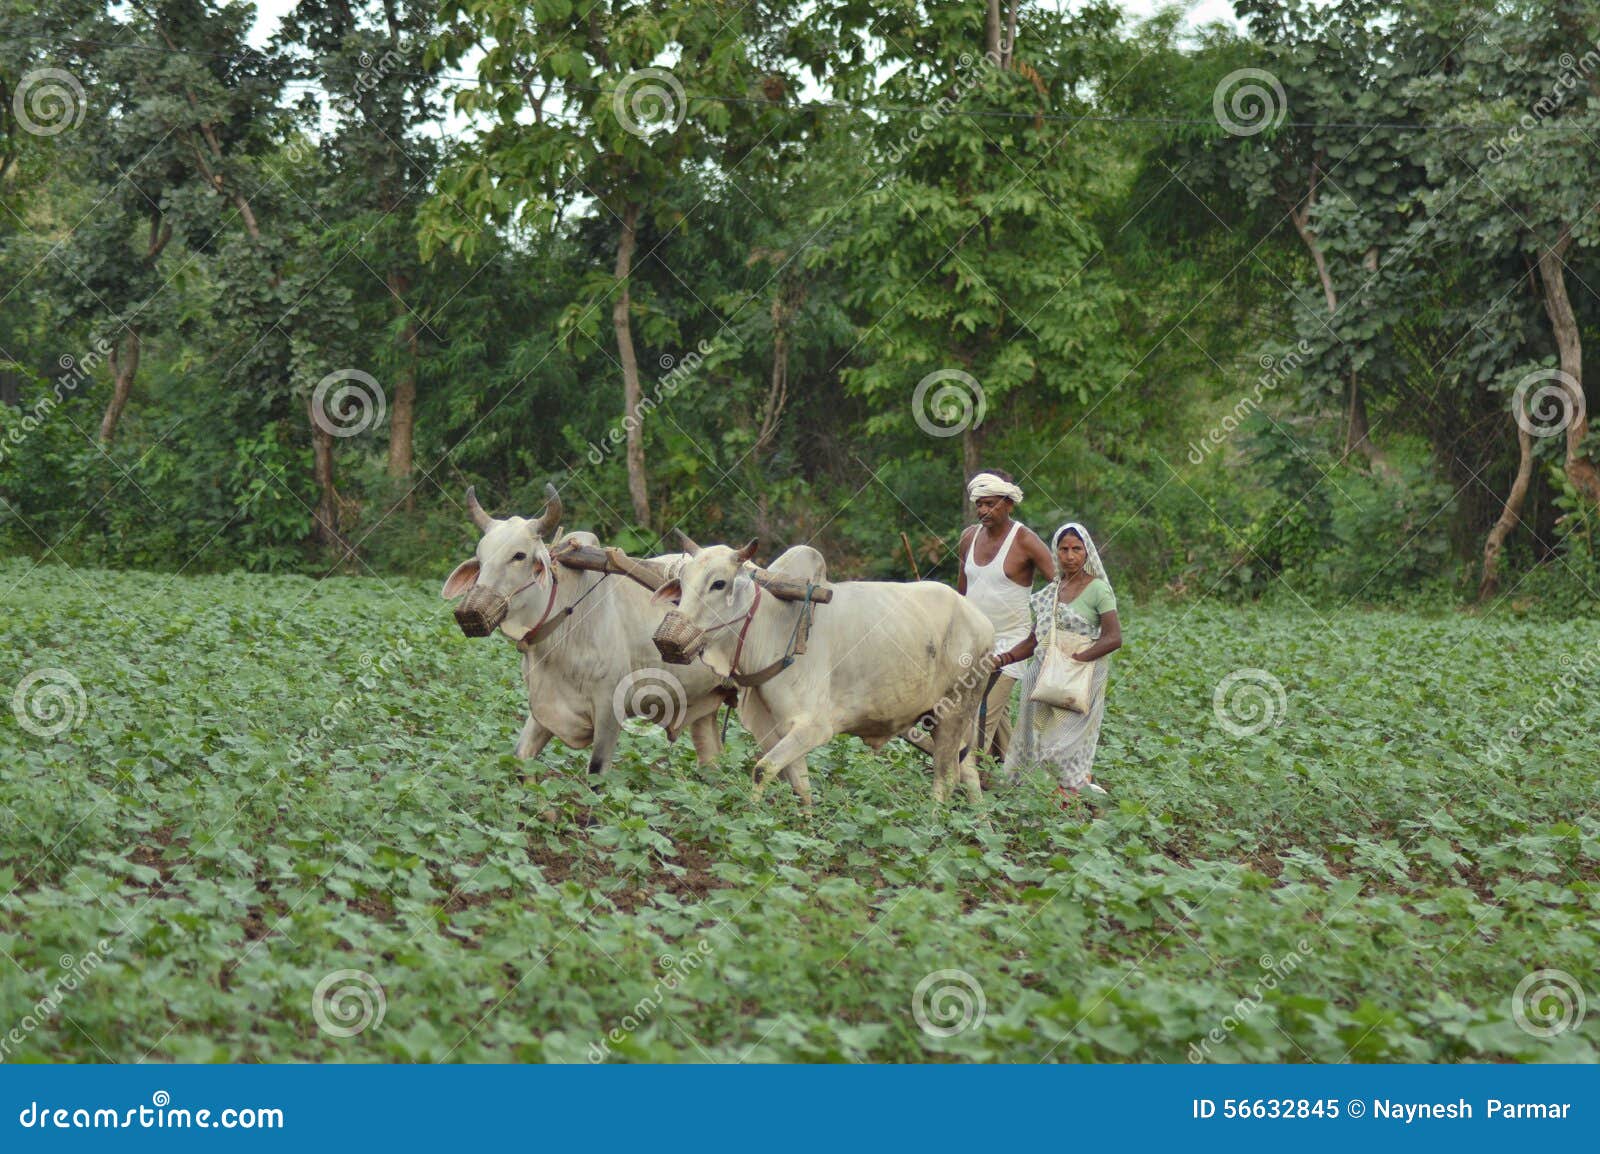 traditional methods of farming in india